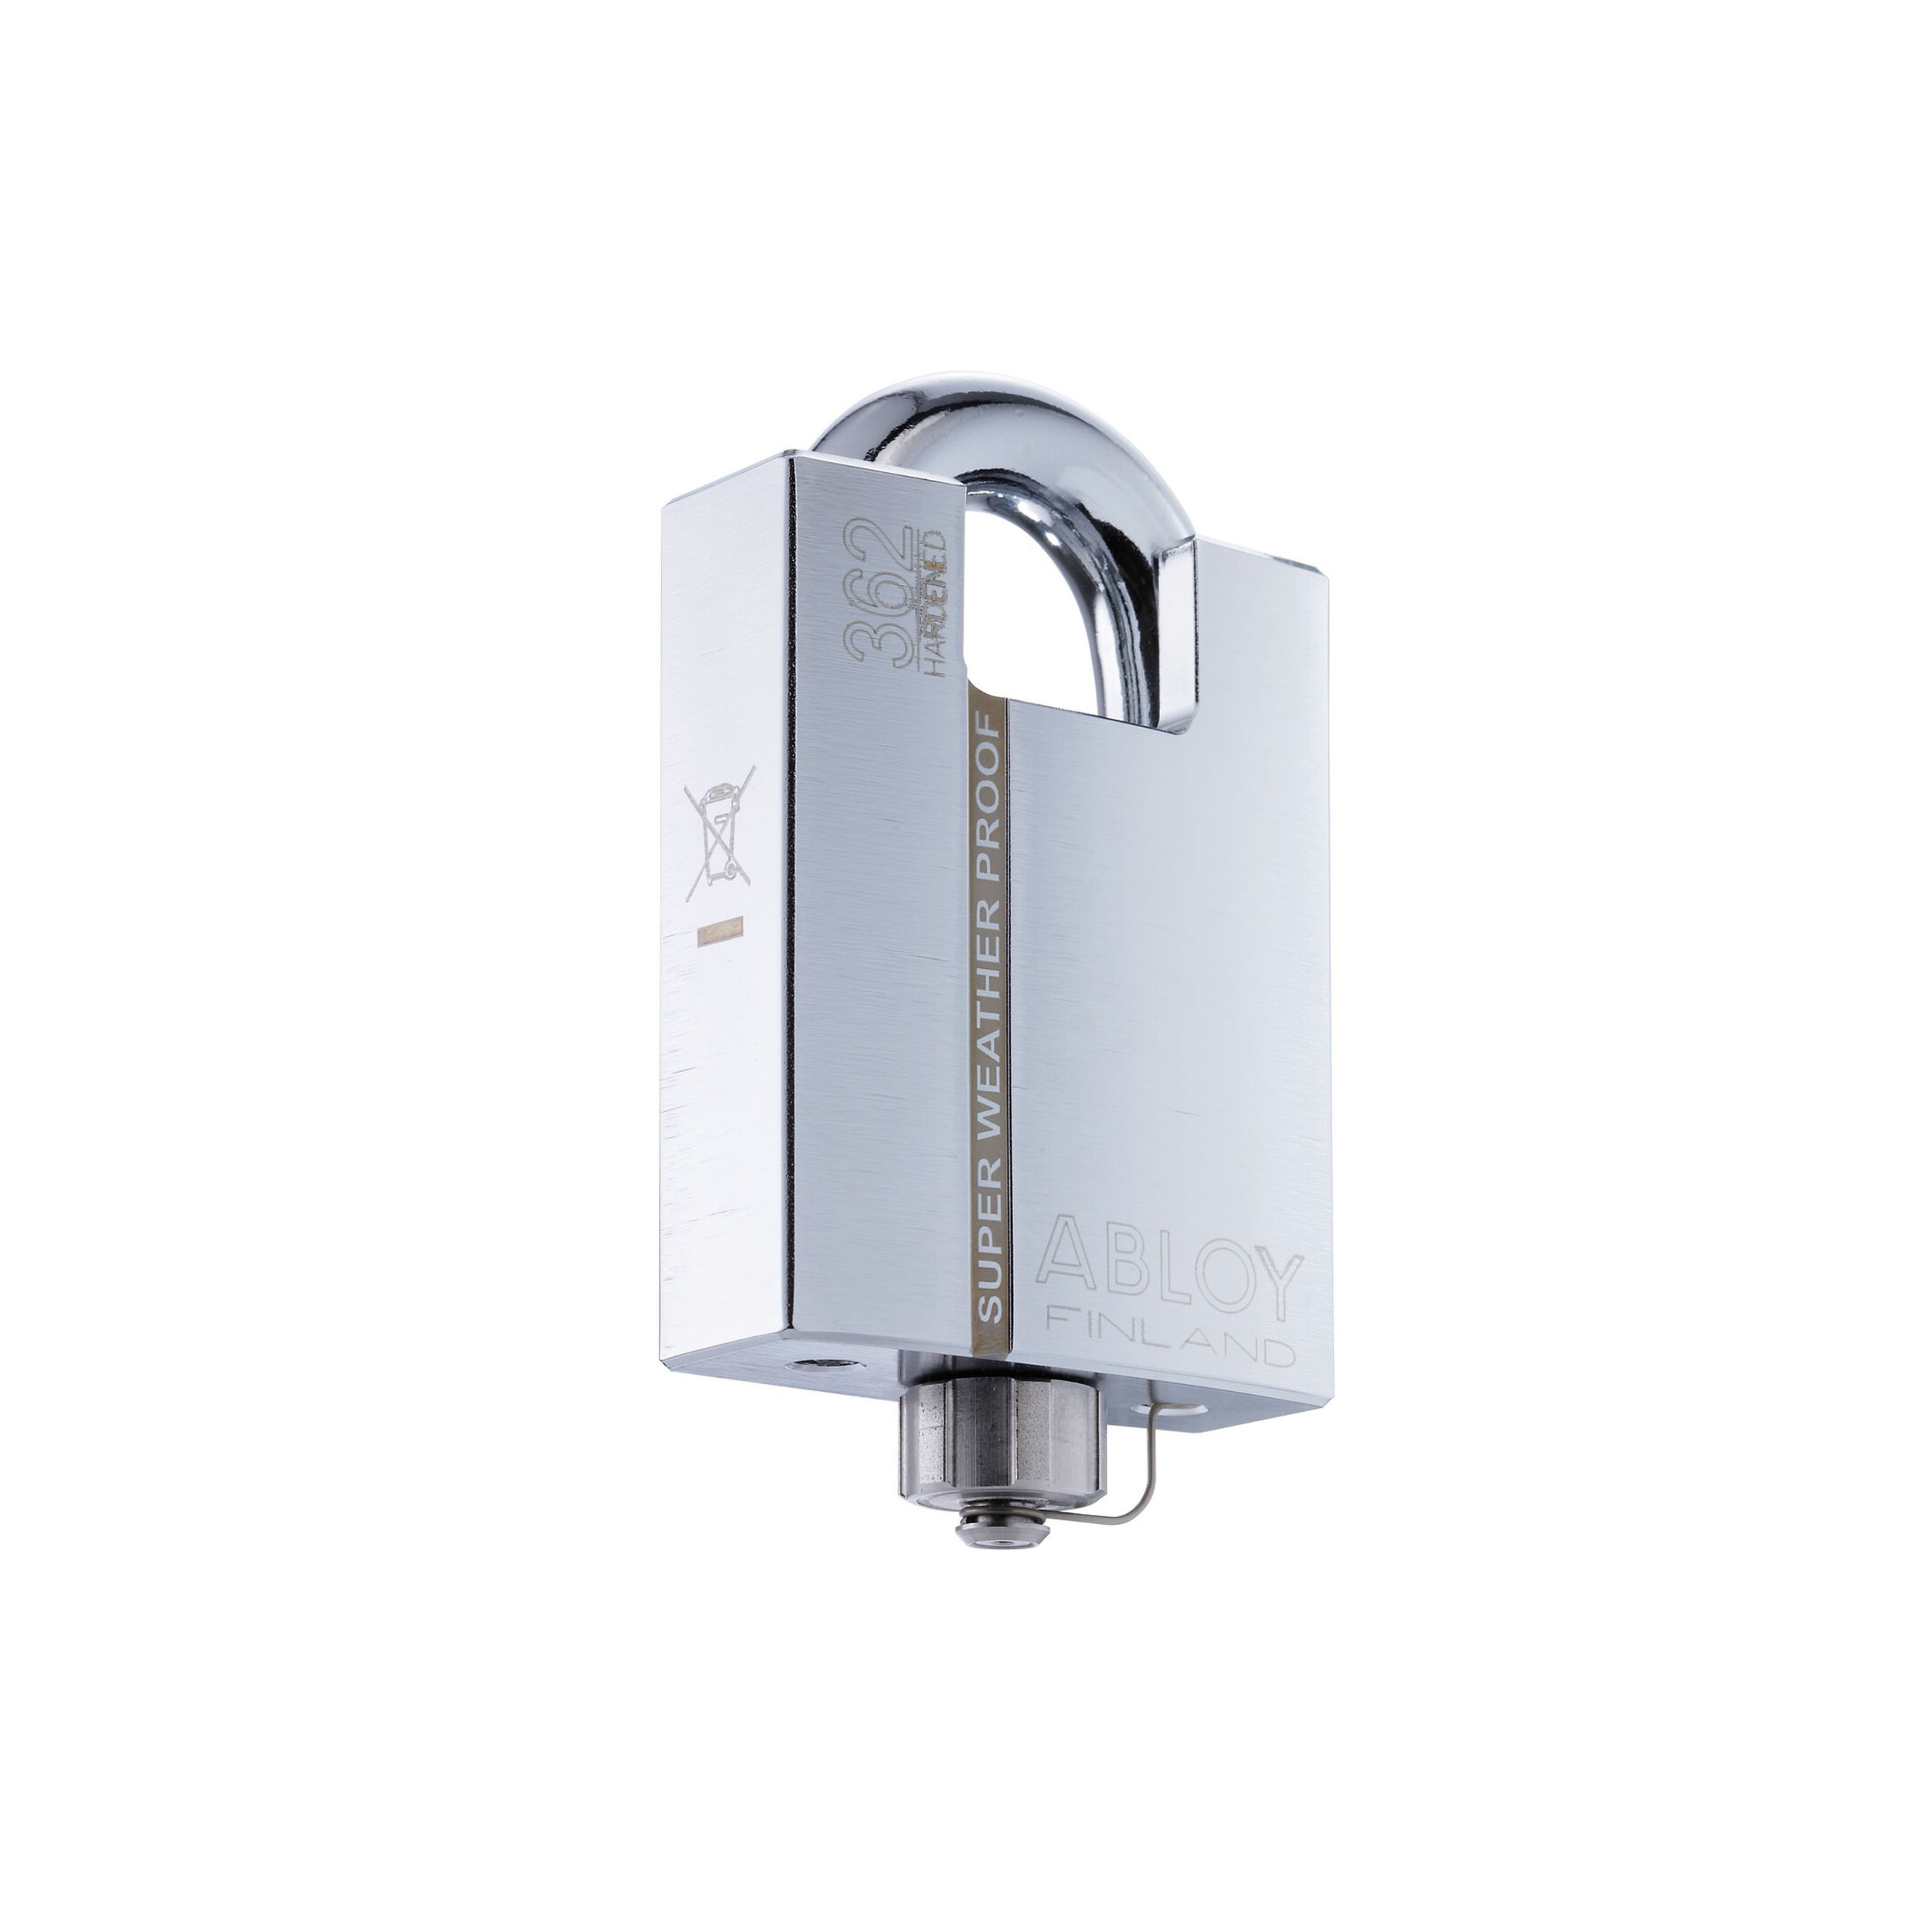 Grade 6 | ABLOY for Trust